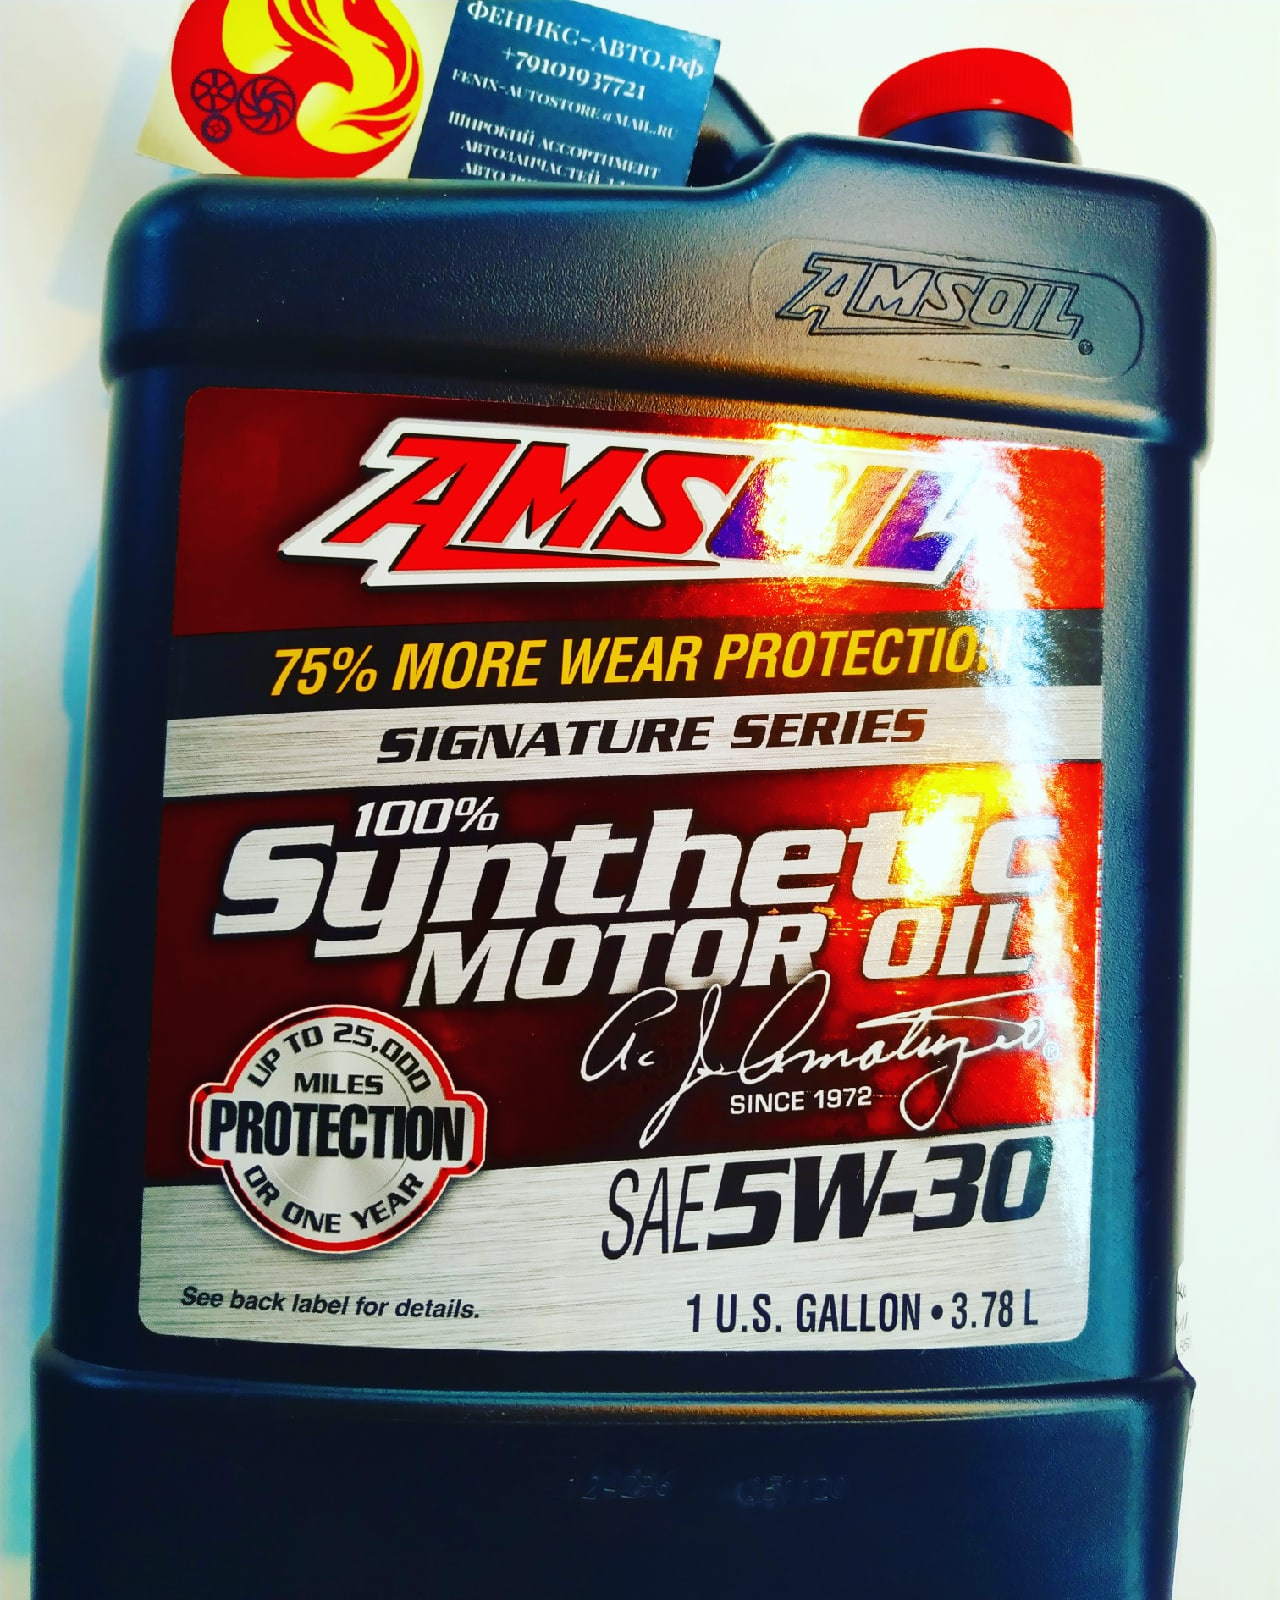 Amsoil signature series synthetic. AMSOIL Signature Series 5w-30. AMSOIL Signature Series Synthetic Motor Oil SAE 5w-30. Аmsoil Signature Series 100% Synthetic 5w-30. AMSOIL Signature Series 5w-30 Synthetic Motor oi.